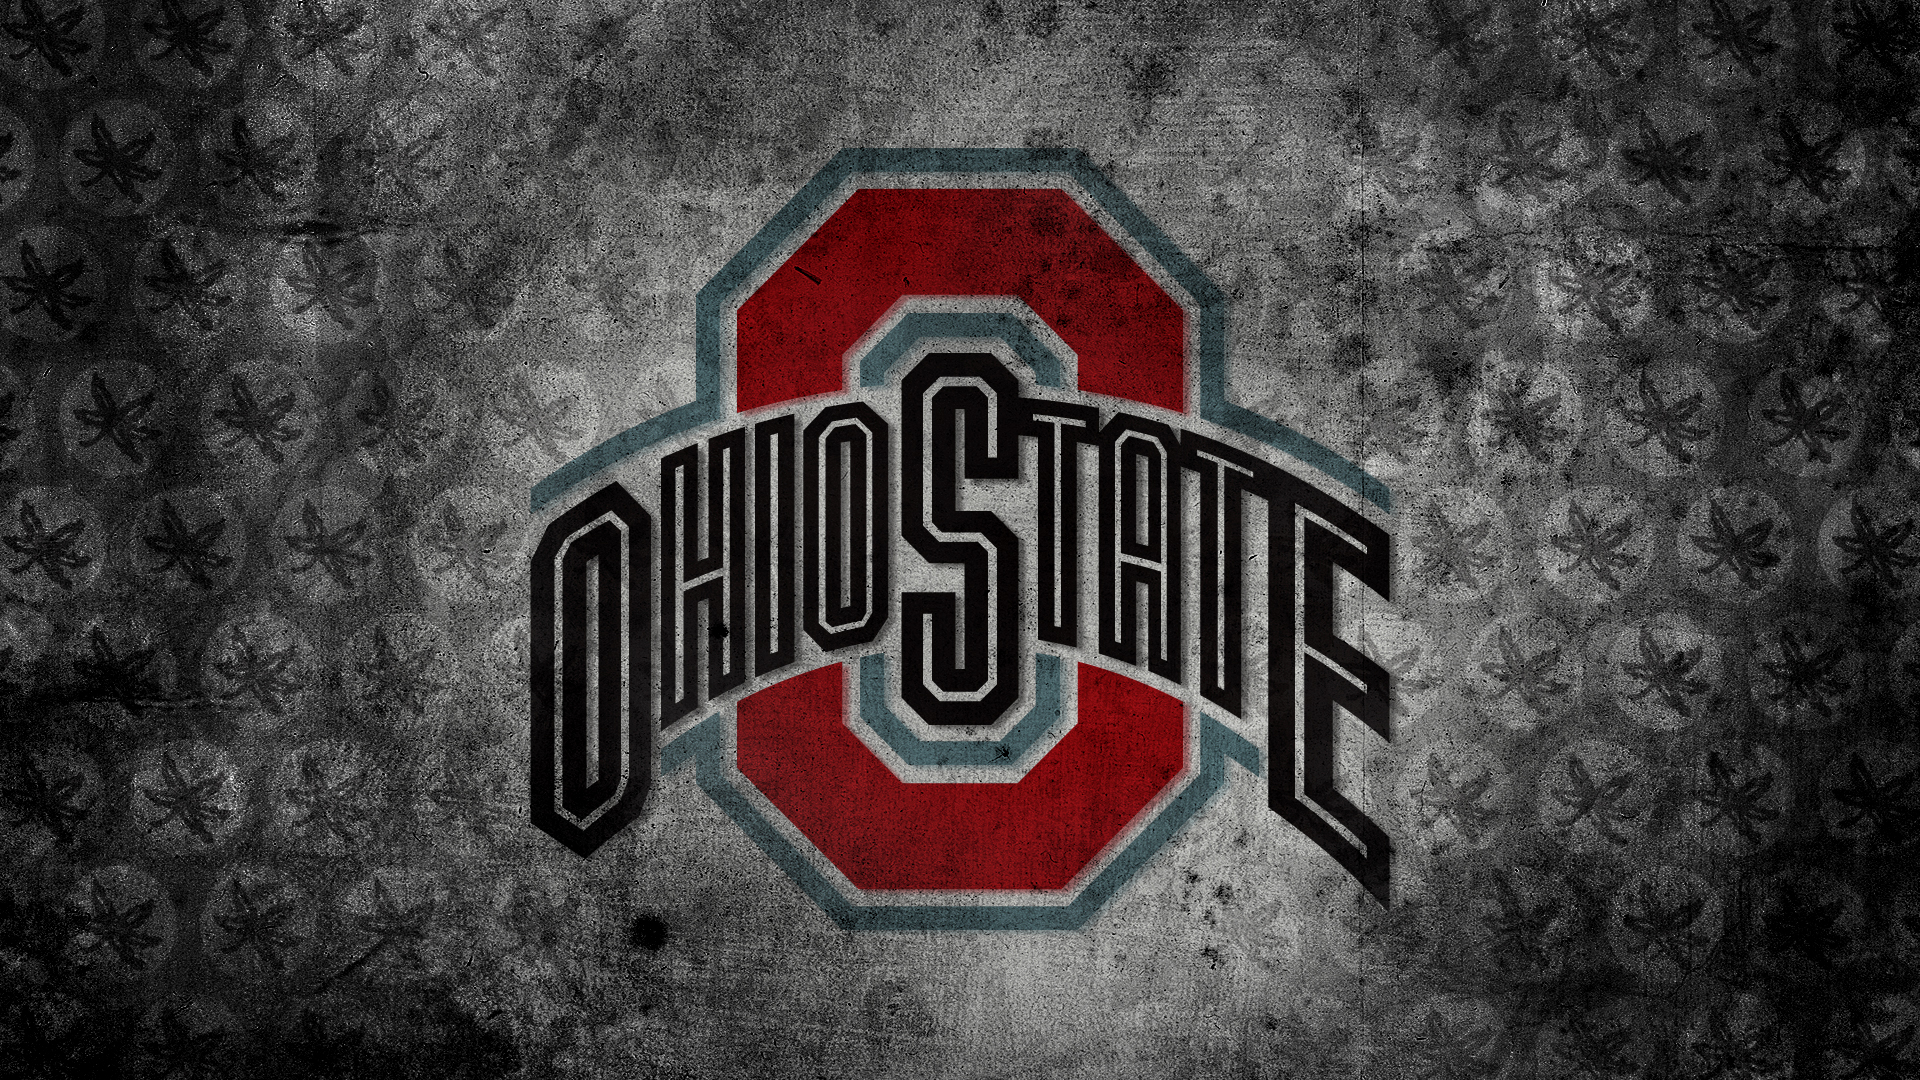 Ohio State Football Helmet Wallpaper Image Amp Pictures Becuo